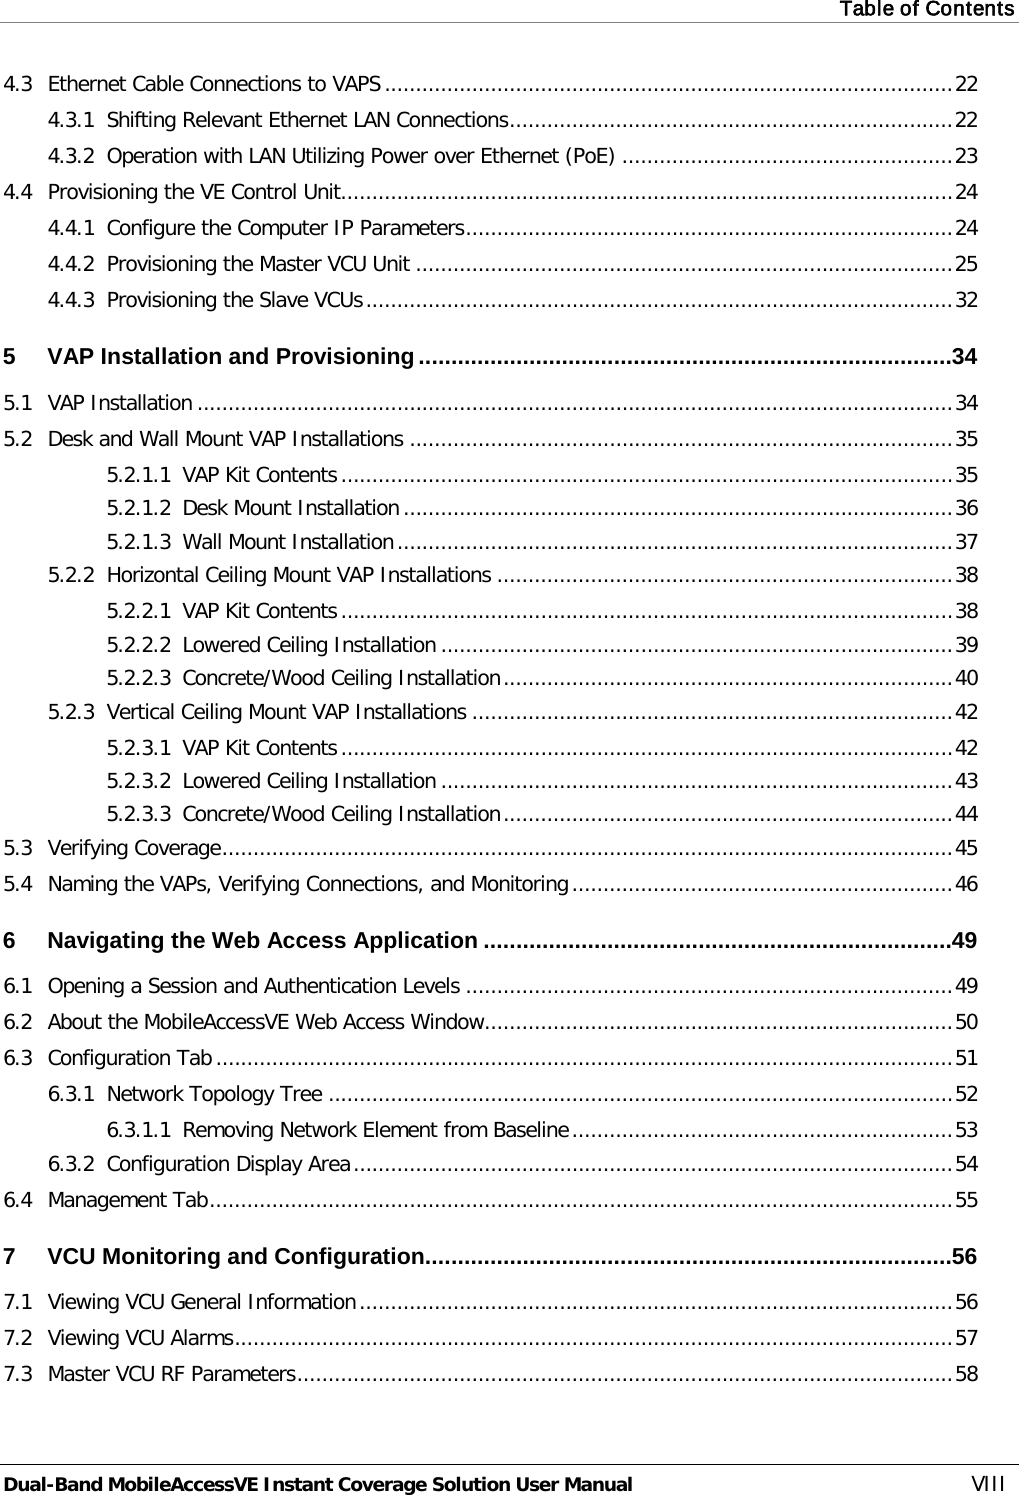 Table of Contents  Dual-Band MobileAccessVE Instant Coverage Solution User Manual VIII 4.3 Ethernet Cable Connections to VAPS ........................................................................................... 22 4.3.1 Shifting Relevant Ethernet LAN Connections ....................................................................... 22 4.3.2 Operation with LAN Utilizing Power over Ethernet (PoE) ..................................................... 23 4.4 Provisioning the VE Control Unit.................................................................................................. 24 4.4.1 Configure the Computer IP Parameters .............................................................................. 24 4.4.2 Provisioning the Master VCU Unit ...................................................................................... 25 4.4.3 Provisioning the Slave VCUs .............................................................................................. 32 5 VAP Installation and Provisioning .................................................................................. 34 5.1 VAP Installation ......................................................................................................................... 34 5.2 Desk and Wall Mount VAP Installations ....................................................................................... 35 5.2.1.1 VAP Kit Contents .................................................................................................. 35 5.2.1.2 Desk Mount Installation ........................................................................................ 36 5.2.1.3 Wall Mount Installation ......................................................................................... 37 5.2.2 Horizontal Ceiling Mount VAP Installations ......................................................................... 38 5.2.2.1 VAP Kit Contents .................................................................................................. 38 5.2.2.2 Lowered Ceiling Installation .................................................................................. 39 5.2.2.3 Concrete/Wood Ceiling Installation ........................................................................ 40 5.2.3 Vertical Ceiling Mount VAP Installations ............................................................................. 42 5.2.3.1 VAP Kit Contents .................................................................................................. 42 5.2.3.2 Lowered Ceiling Installation .................................................................................. 43 5.2.3.3 Concrete/Wood Ceiling Installation ........................................................................ 44 5.3 Verifying Coverage ..................................................................................................................... 45 5.4 Naming the VAPs, Verifying Connections, and Monitoring ............................................................. 46 6 Navigating the Web Access Application ........................................................................ 49 6.1 Opening a Session and Authentication Levels .............................................................................. 49 6.2 About the MobileAccessVE Web Access Window........................................................................... 50 6.3 Configuration Tab ...................................................................................................................... 51 6.3.1 Network Topology Tree .................................................................................................... 52 6.3.1.1 Removing Network Element from Baseline ............................................................. 53 6.3.2 Configuration Display Area ................................................................................................ 54 6.4 Management Tab ....................................................................................................................... 55 7 VCU Monitoring and Configuration ................................................................................. 56 7.1 Viewing VCU General Information ............................................................................................... 56 7.2 Viewing VCU Alarms ................................................................................................................... 57 7.3 Master VCU RF Parameters ......................................................................................................... 58 